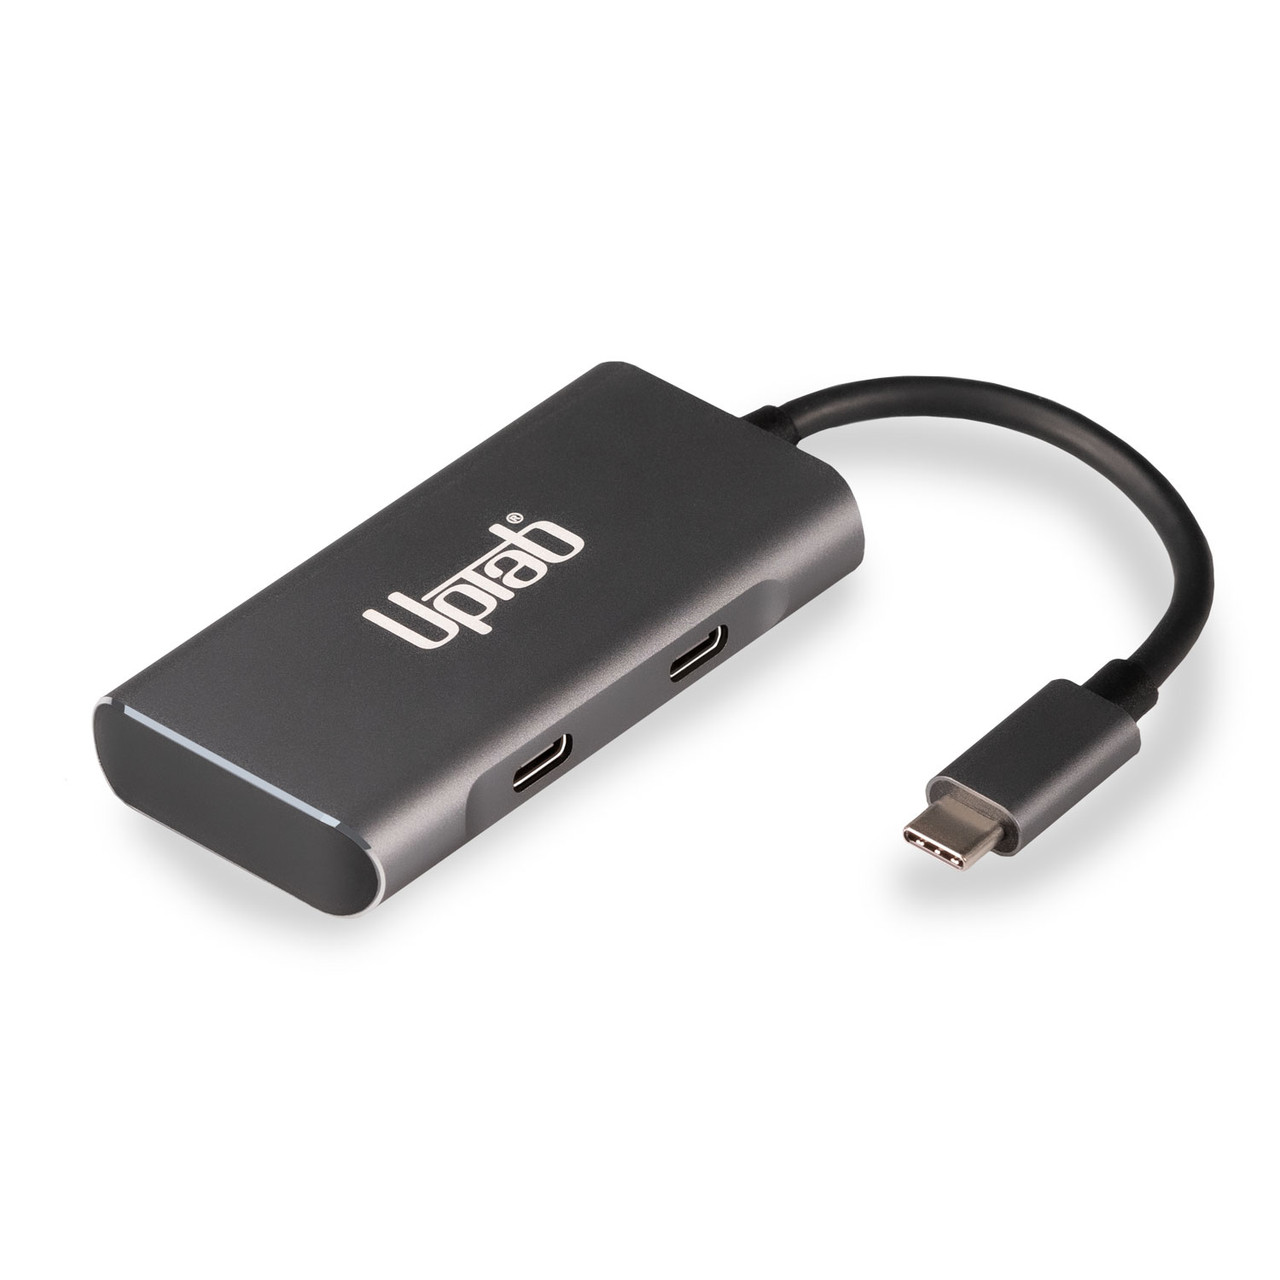 USB 3.1 Type C to HDMI Cables - Thunderbolt 3 - Custom Cable Connection